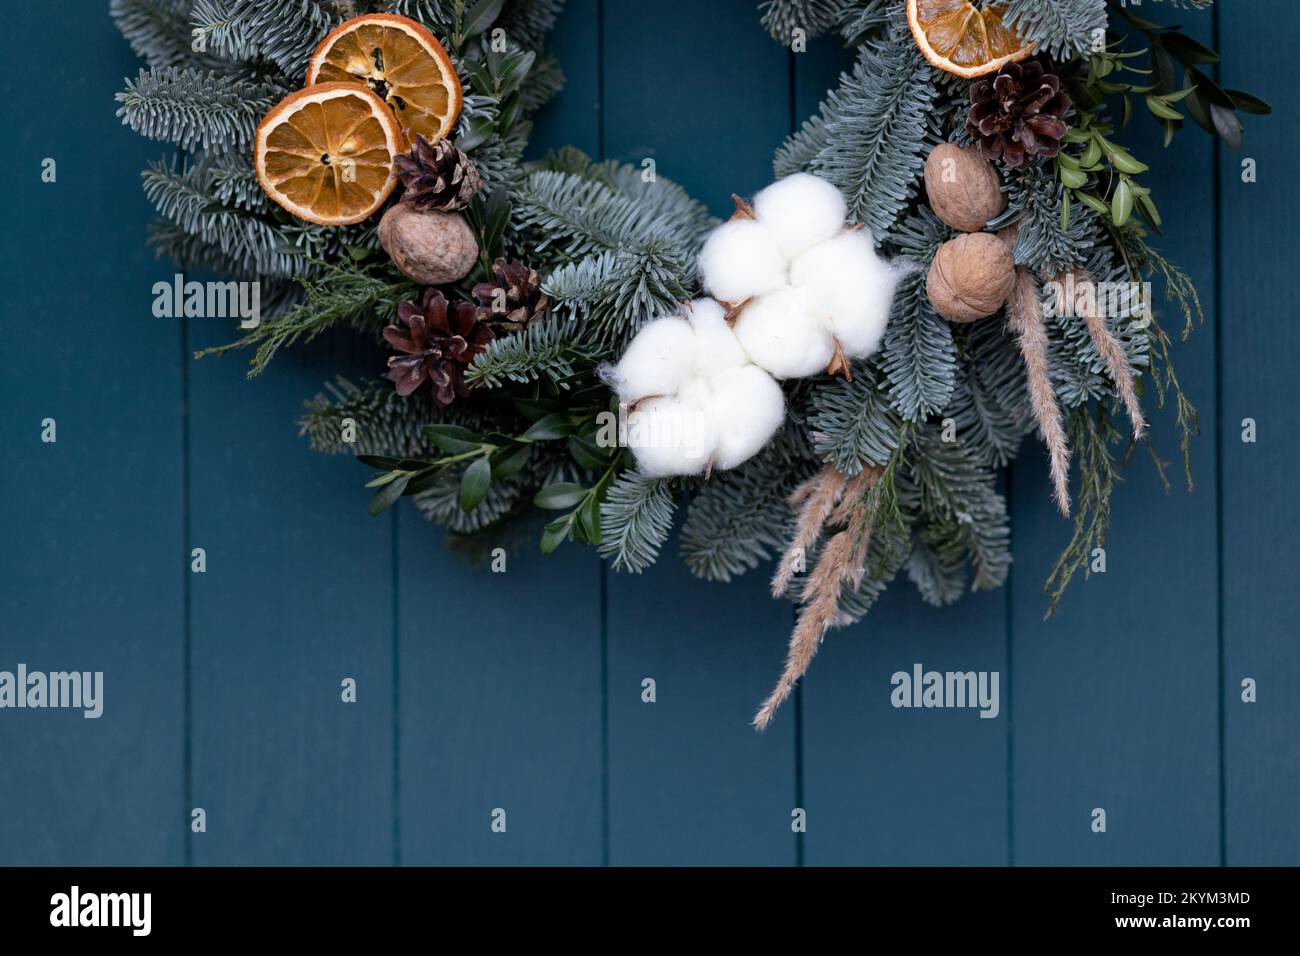 Part of Christmas wreath with pine branches, pine cones, nuts on blue door background with space for text Stock Photo